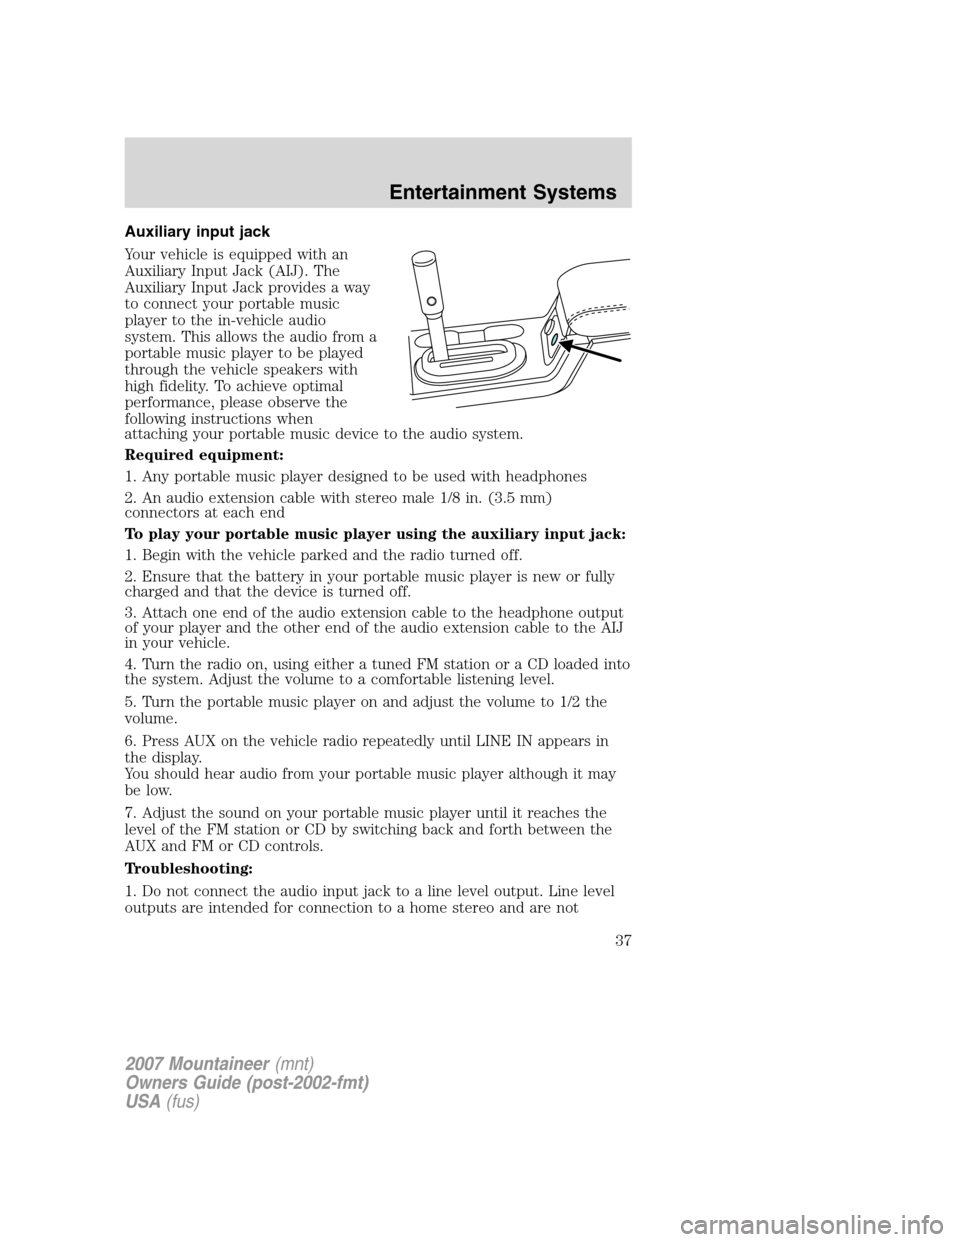 Mercury Mountaineer 2007  Owners Manuals Auxiliary input jack
Your vehicle is equipped with an
Auxiliary Input Jack (AIJ). The
Auxiliary Input Jack provides a way
to connect your portable music
player to the in-vehicle audio
system. This all